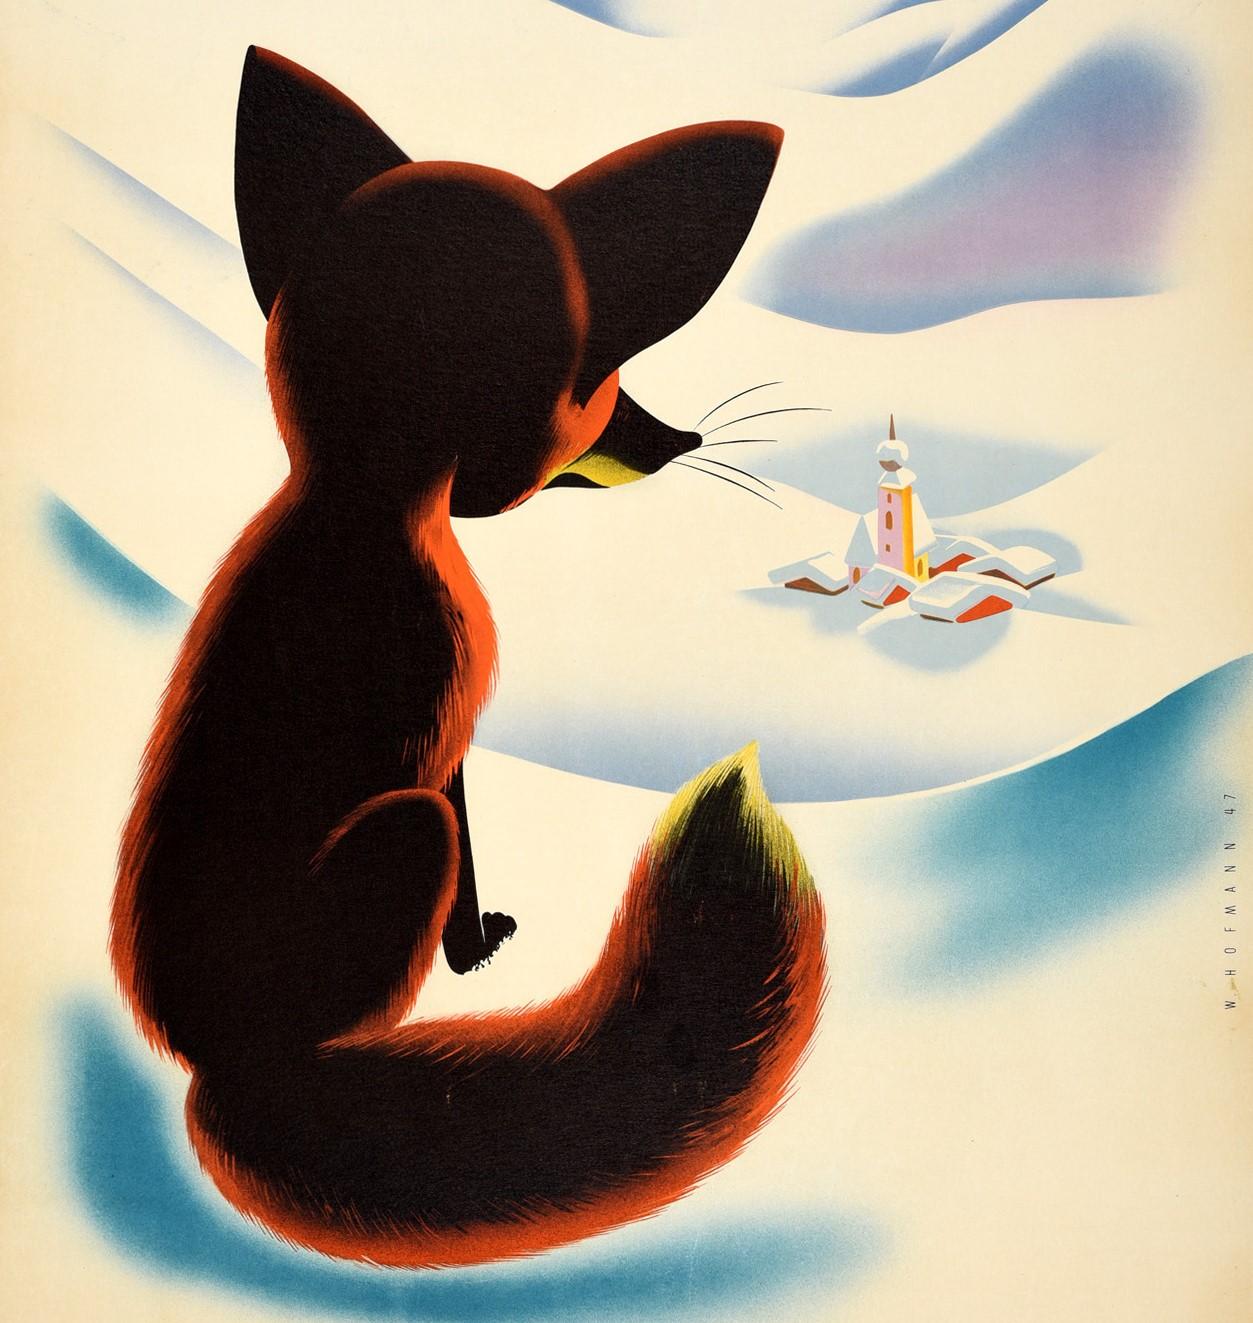 Original vintage travel poster for Osterreich / Austria featuring a great illustration by Walter Hofmann (1906-1975) of a red fox sitting on the snow in the foreground, looking down at a snow topped church and village buildings nestled in a valley